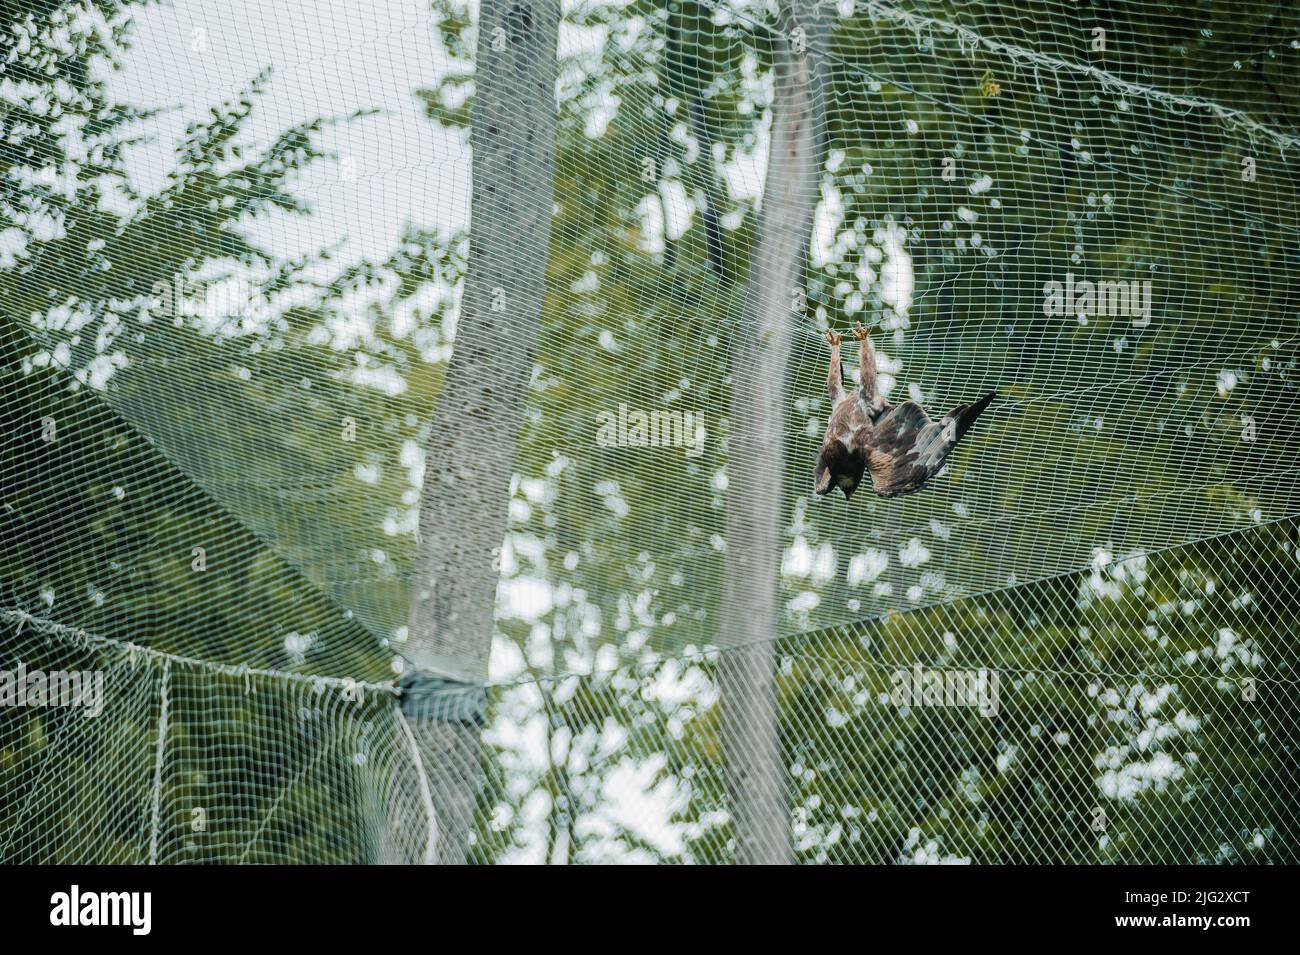 Hawk in the forest, mesh in the background. Bird of prey from the hawk family Stock Photo